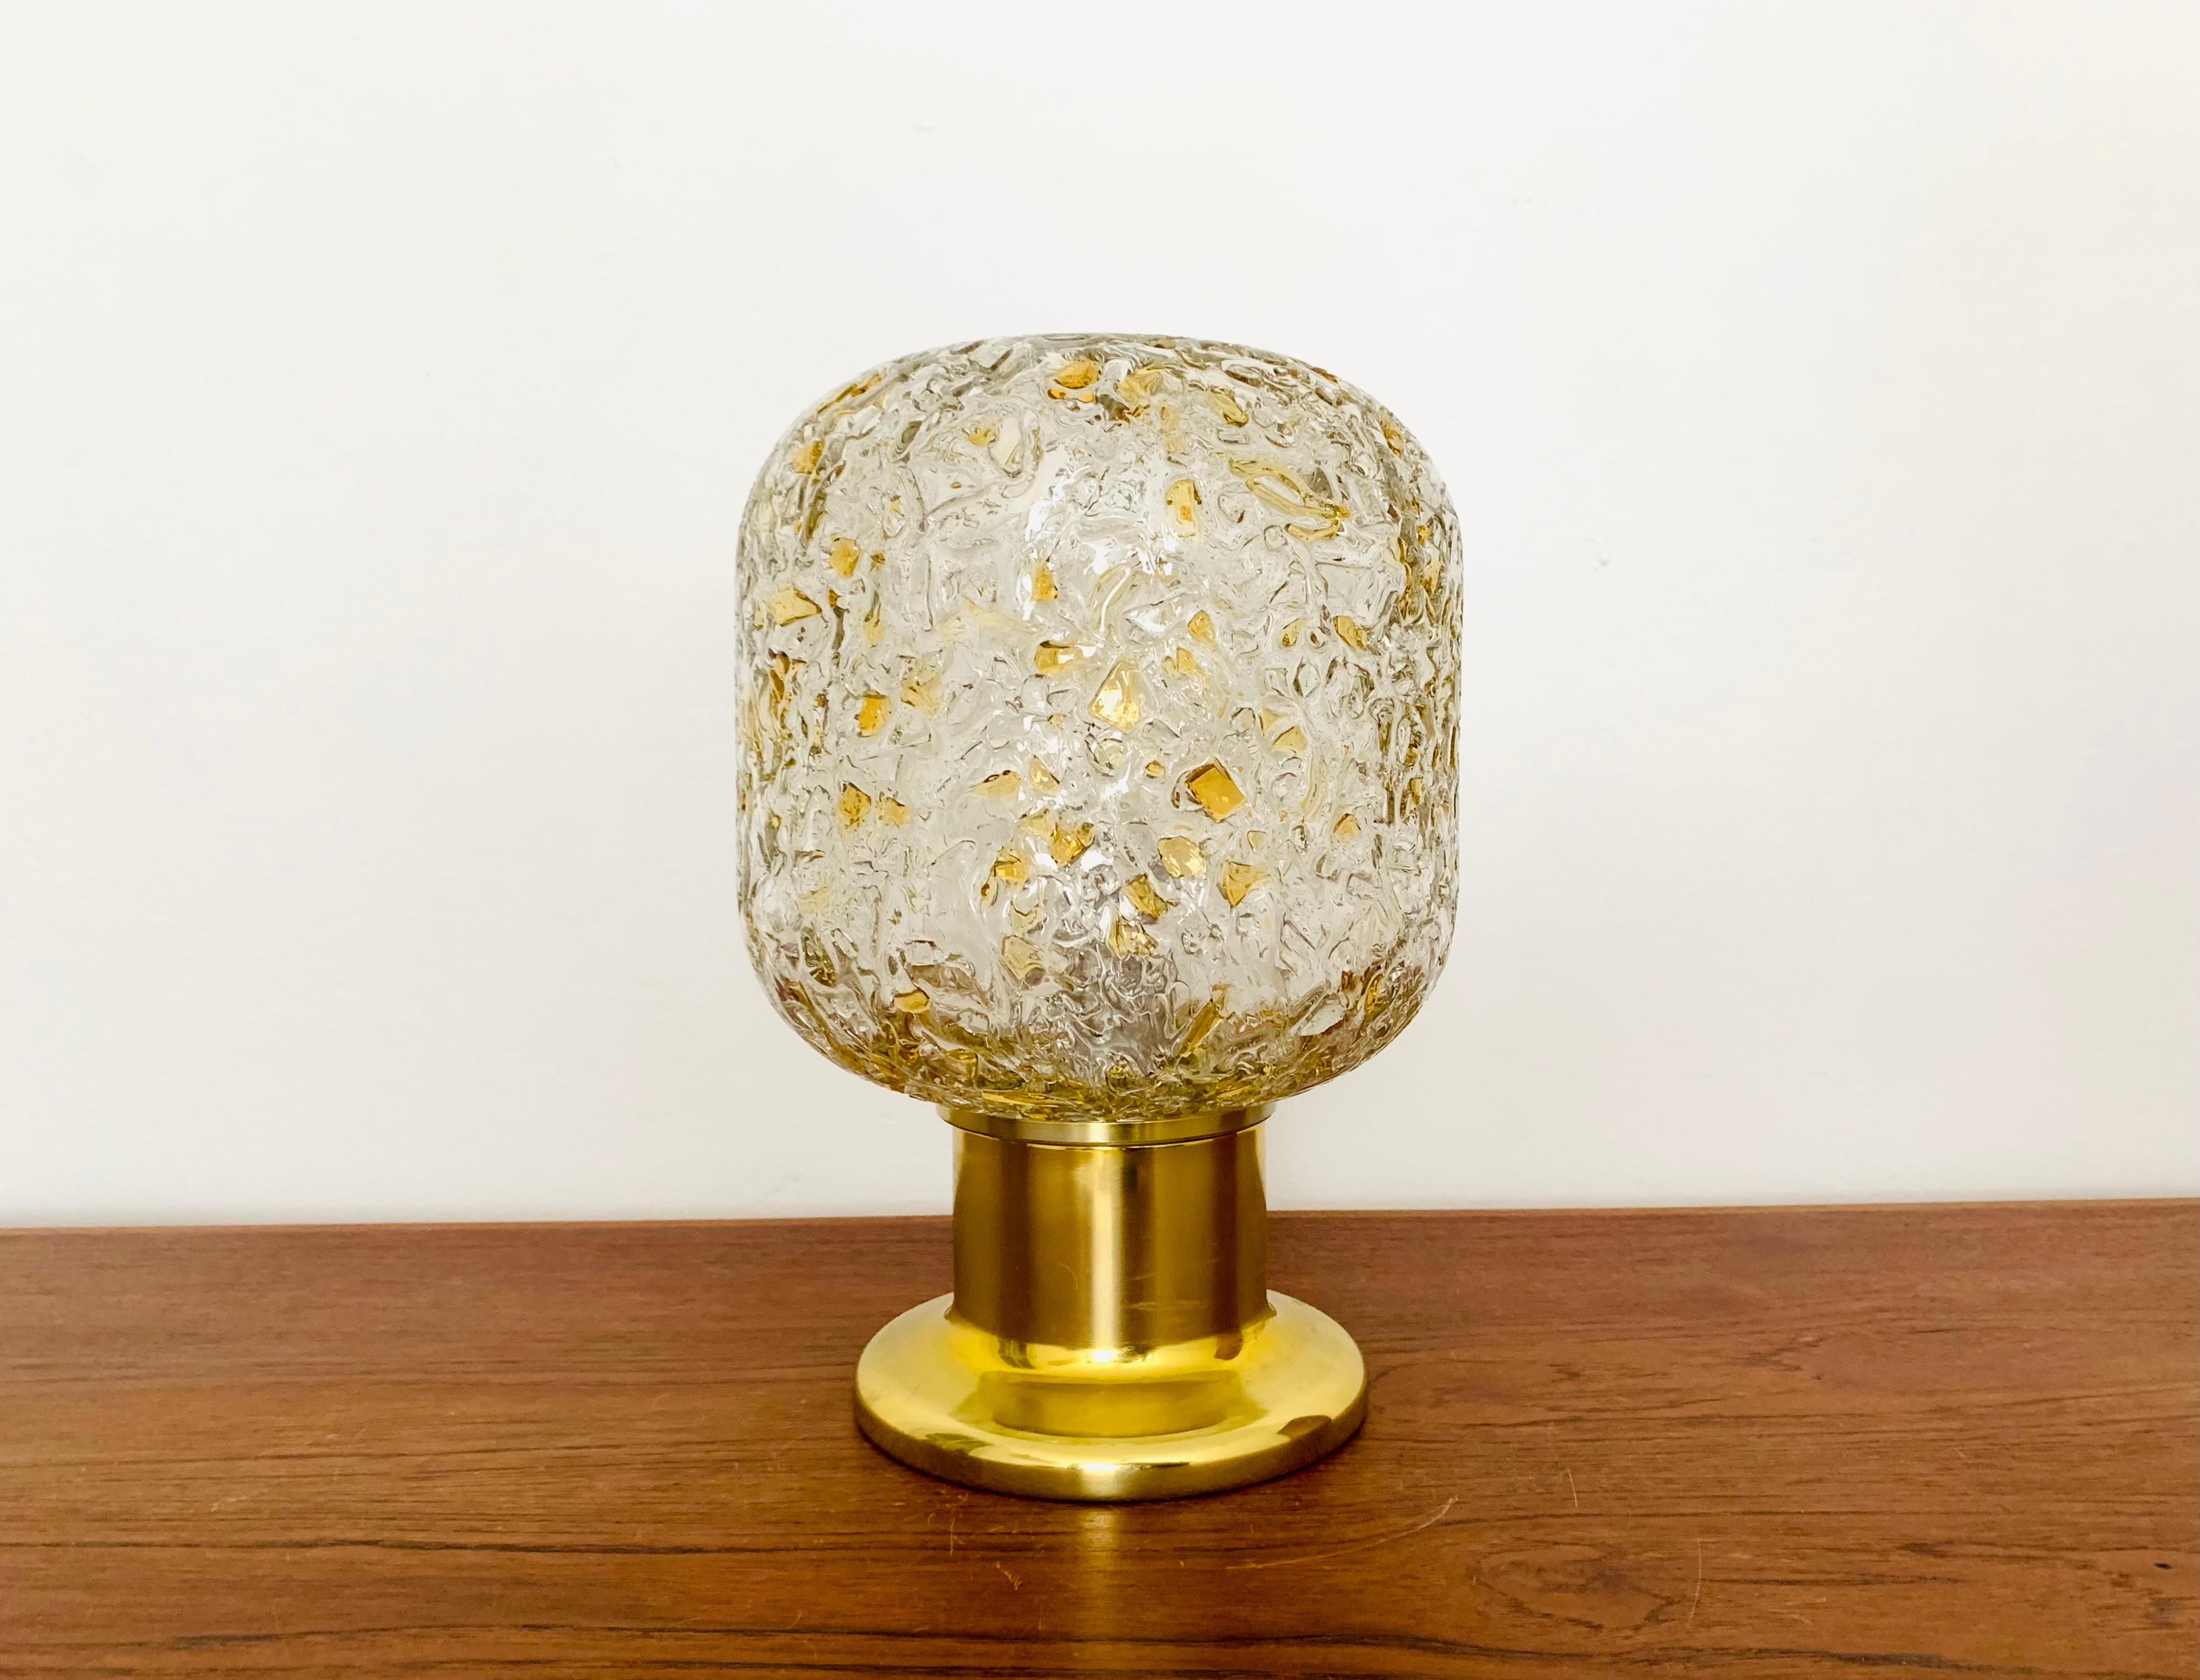 Very nice gold table lamp by Doria from the 1960s.
Very elegant Hollywood Regency design with a fantastically glamorous look.
The structure in the glass creates a spectacularly sparkling light.

Condition:

Very good vintage condition with